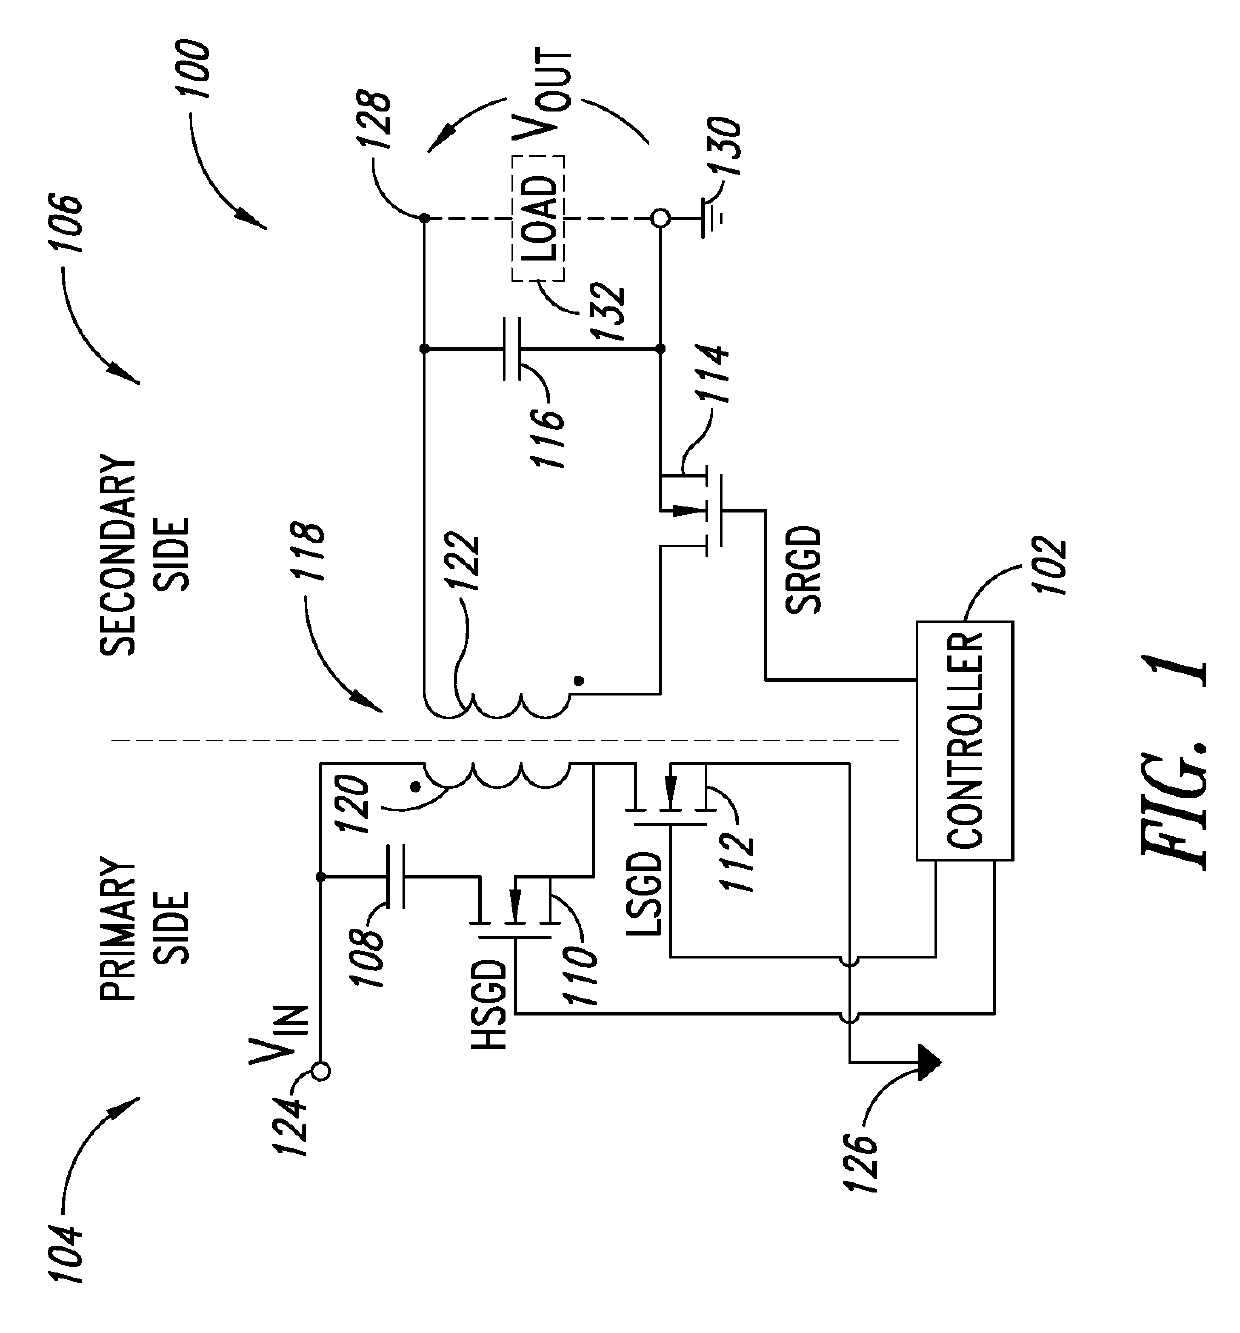 Active clamp flyback converter control with reduced current